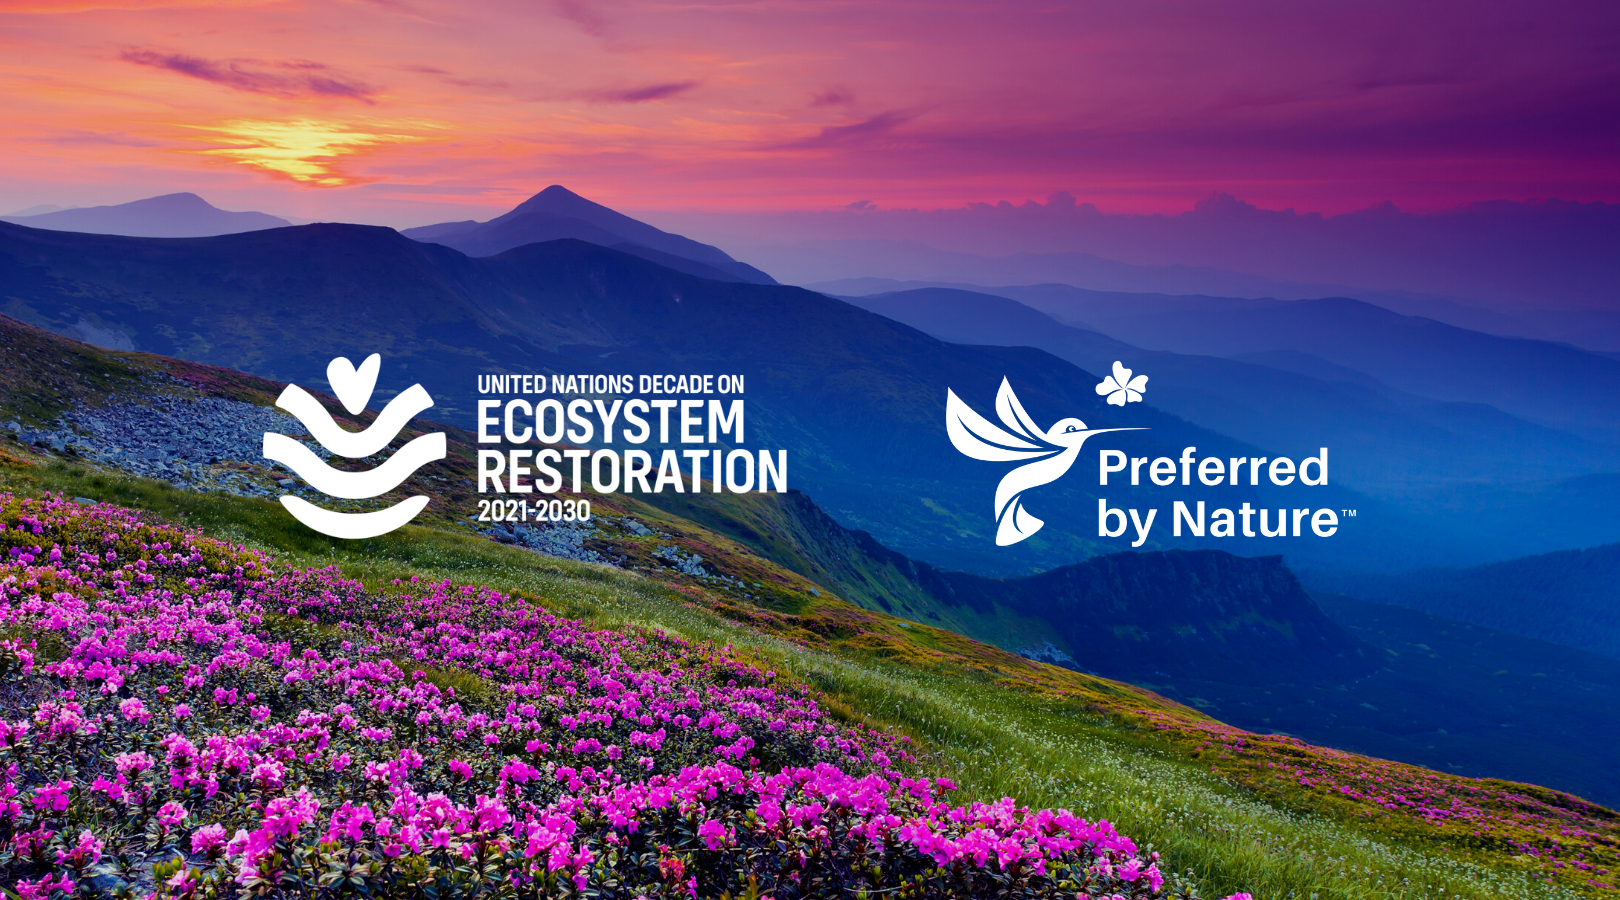 Preferred by Nature is now an Actor for the UN Decade on Ecosystem Restoration 2021-2030